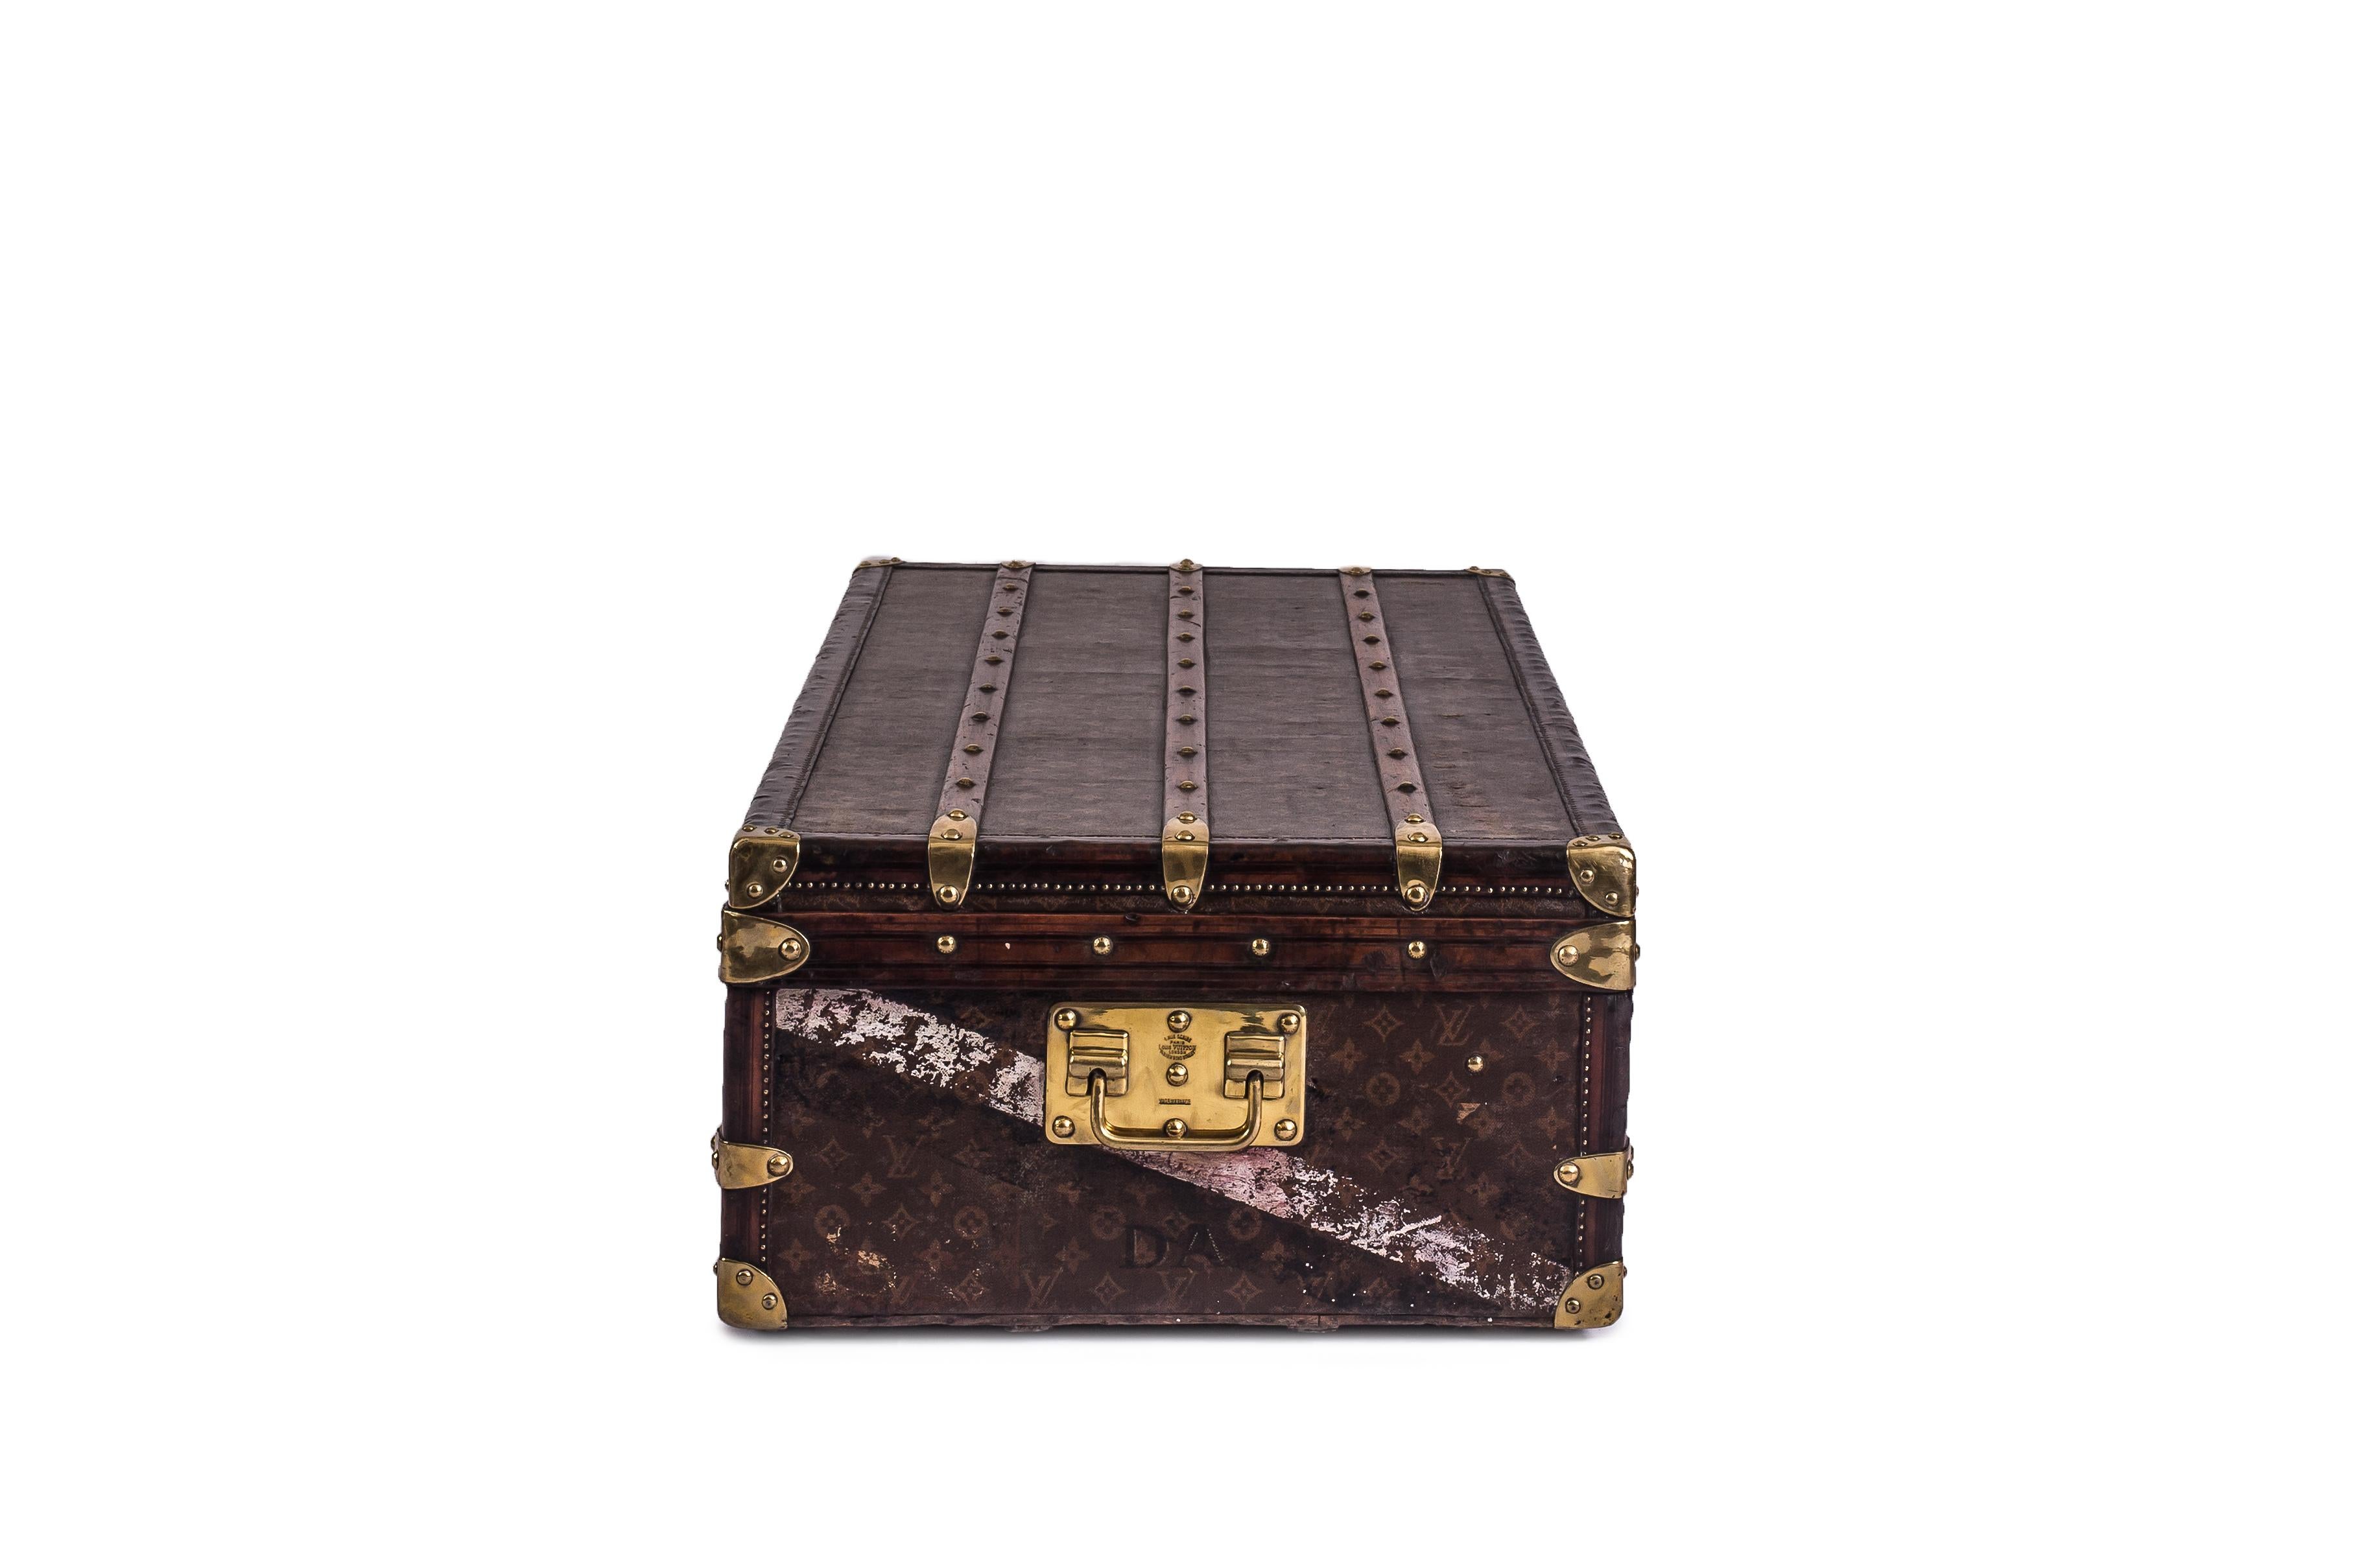 A beautiful trunk that is entirely covered by the signature monogrammed canvas from Louis Vuitton circa 1920s. The monogram canvas shows some loss and scratches on the top of the trunk.

It features:
- Leather trim, 
- Brass hardware. 
- leather